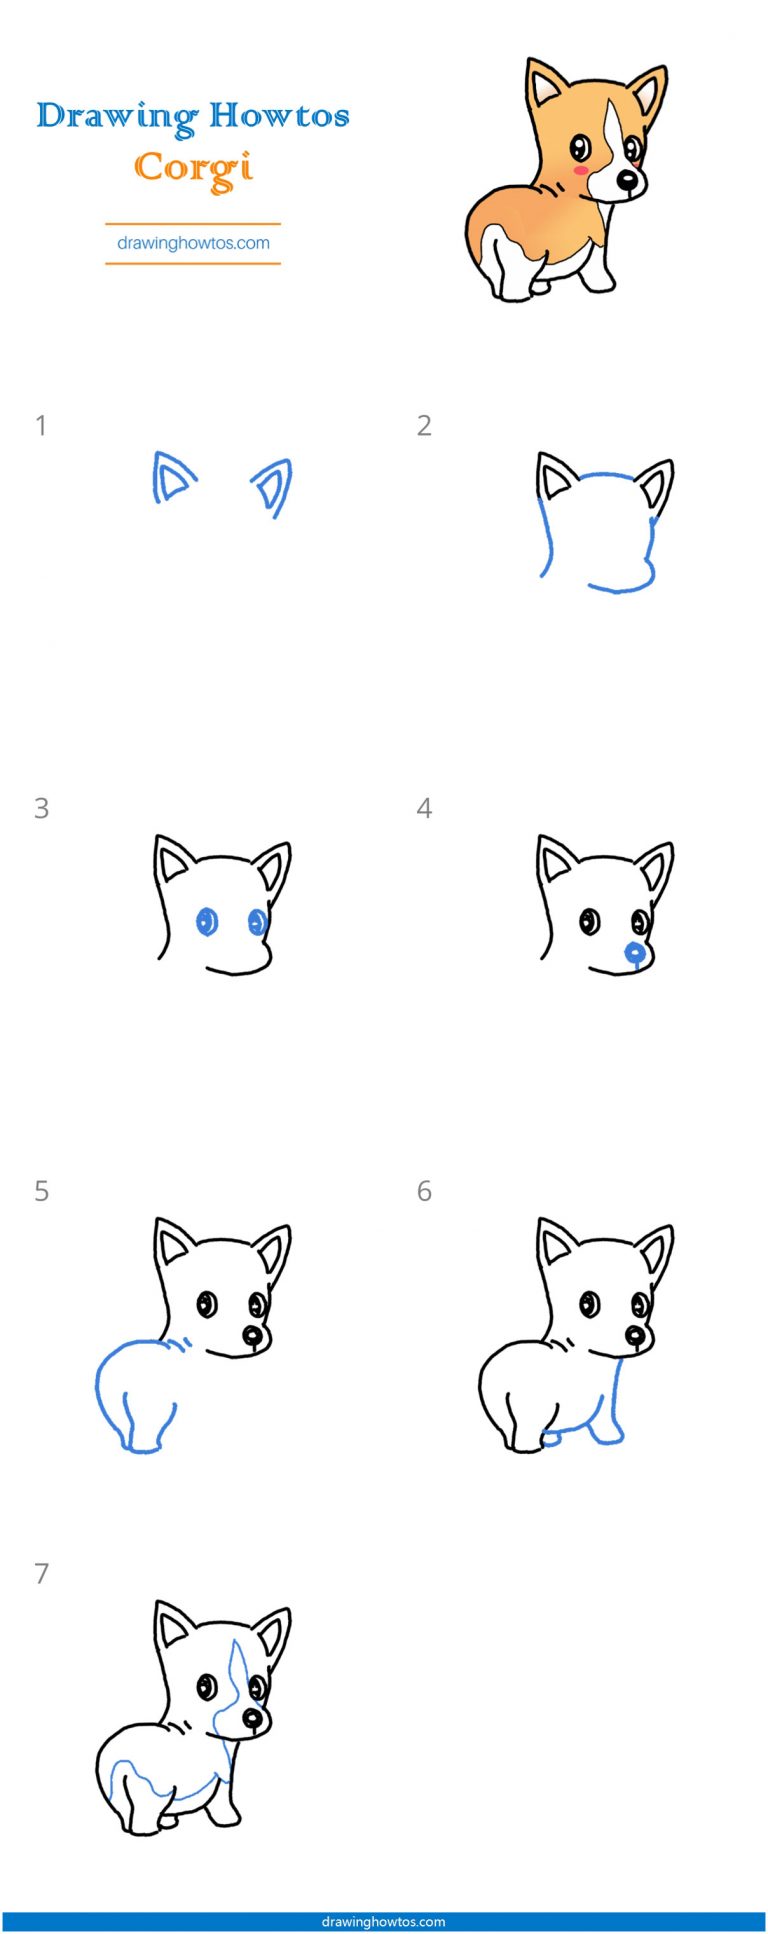 How to Draw a Corgi - Step by Step Easy Drawing Guides - Drawing Howtos